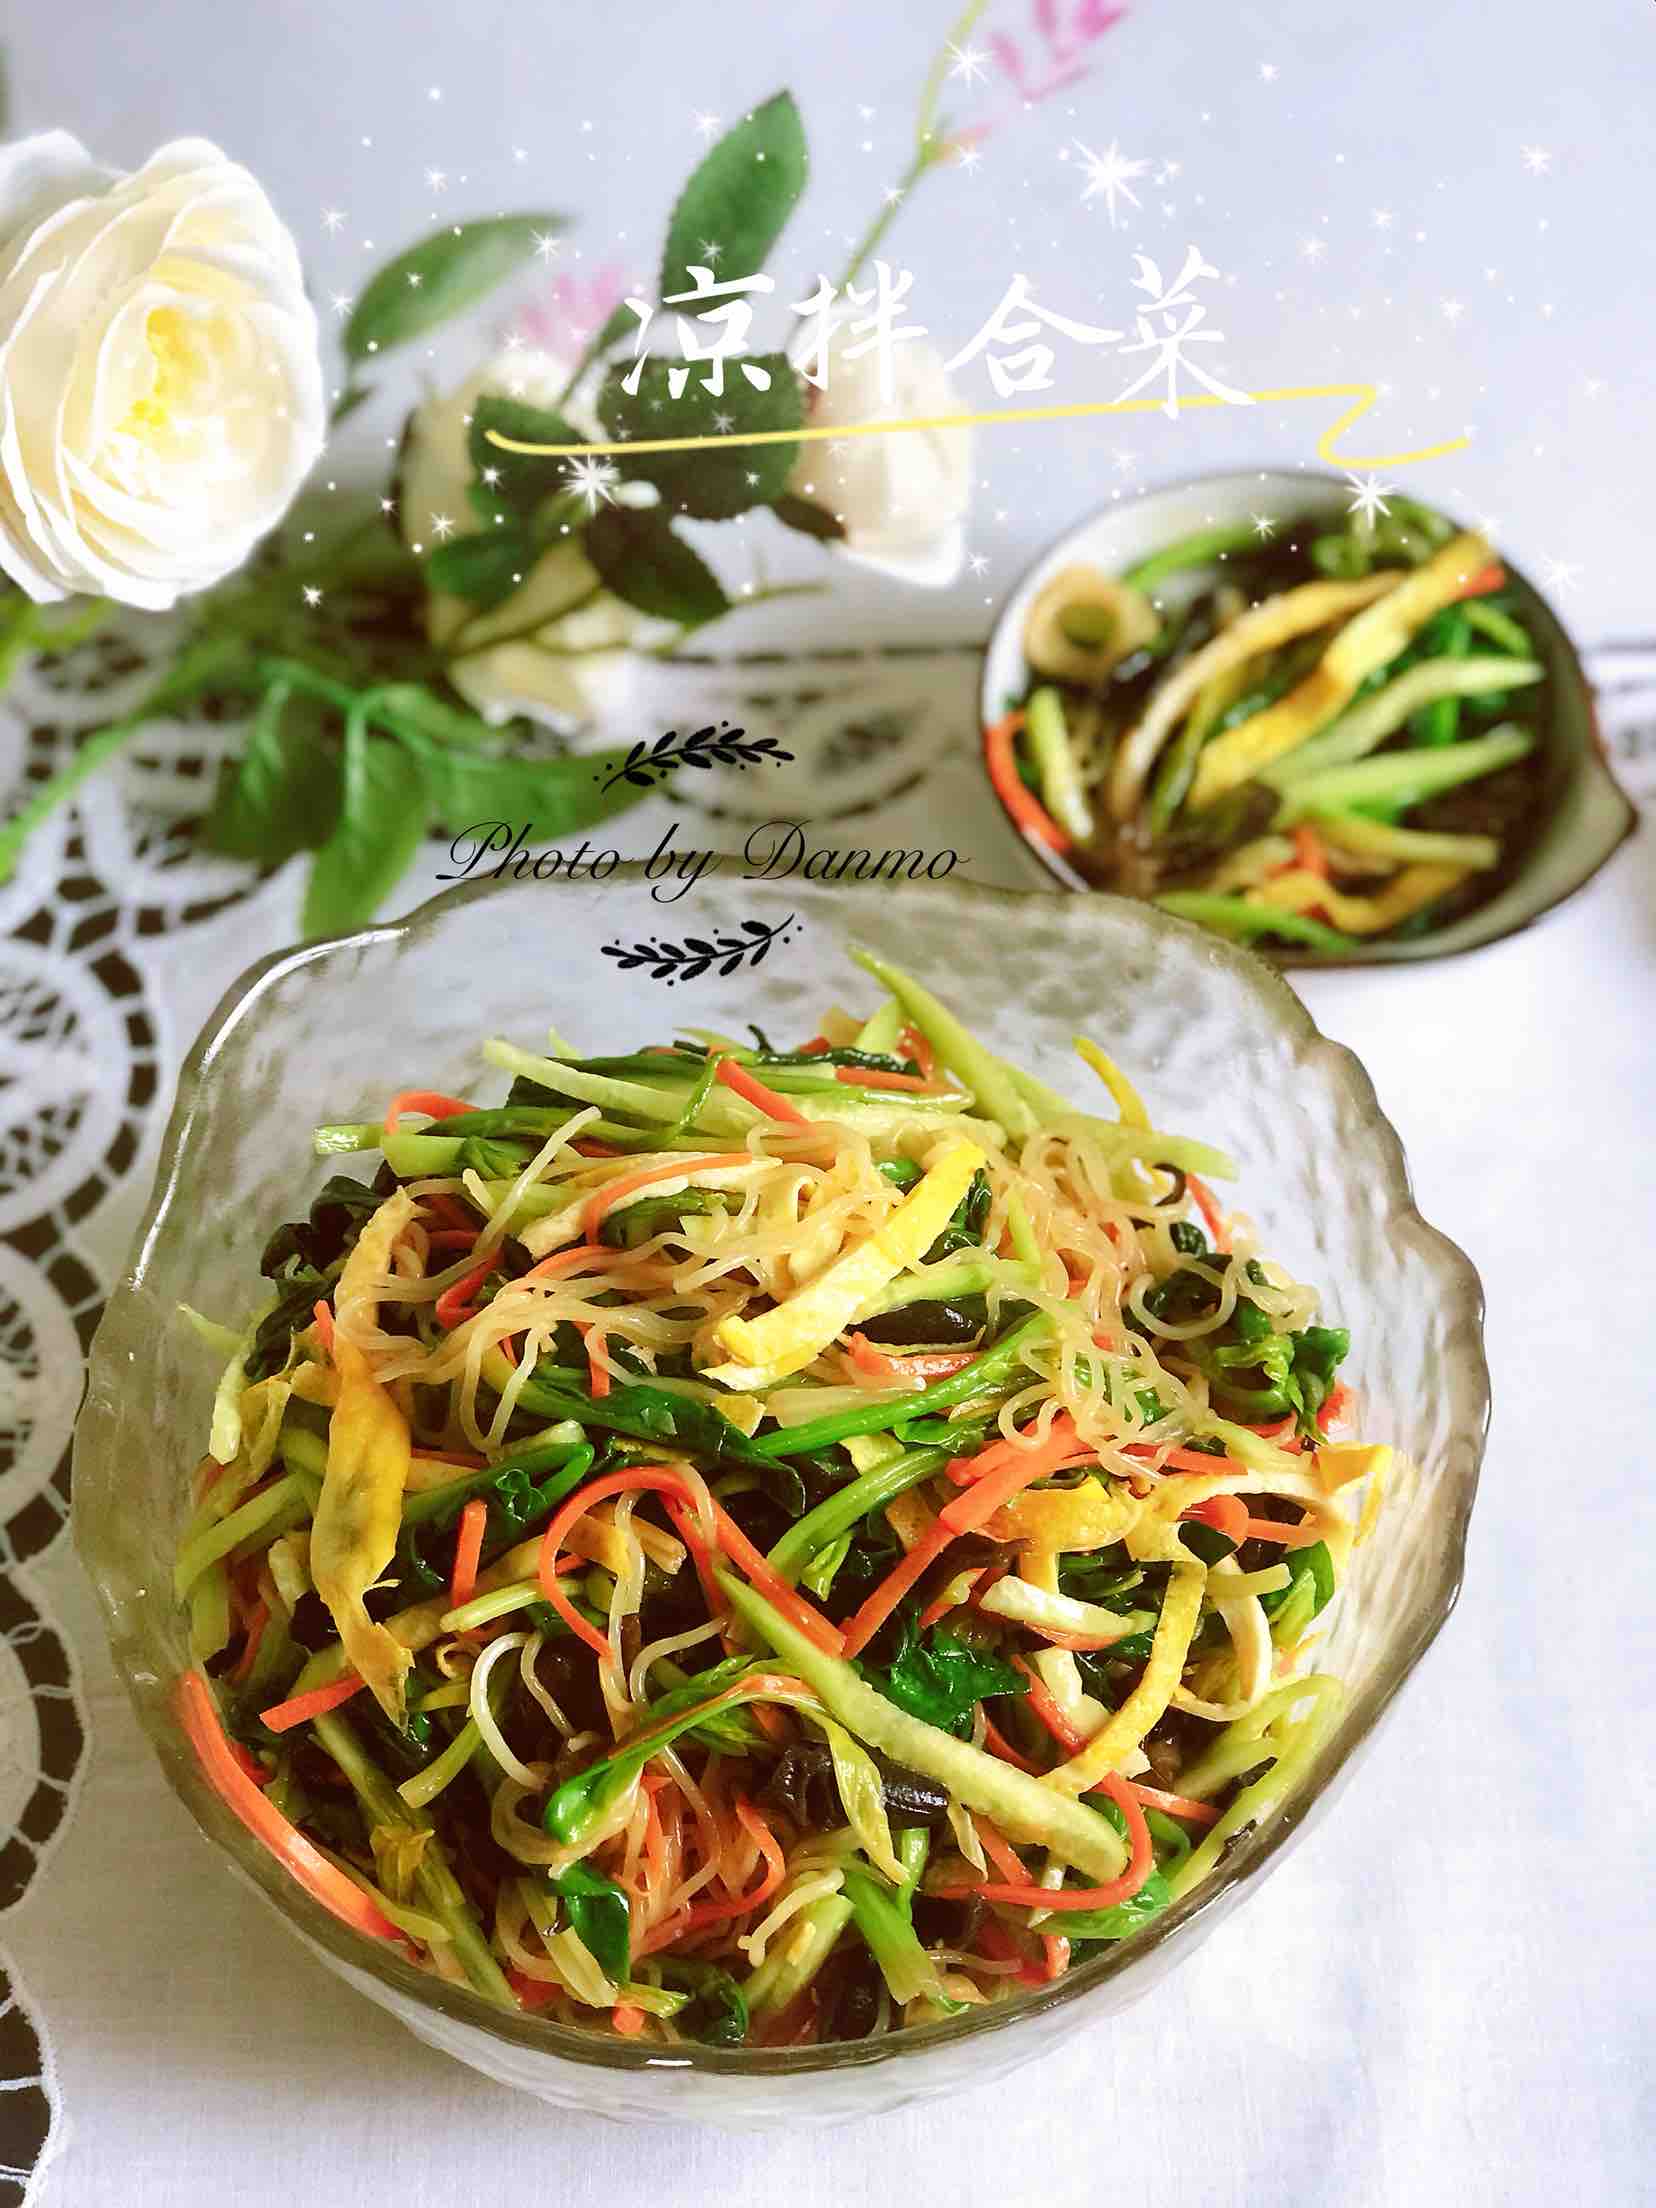 Light, Refreshing, Nutritious and Delicious Coleslaw recipe